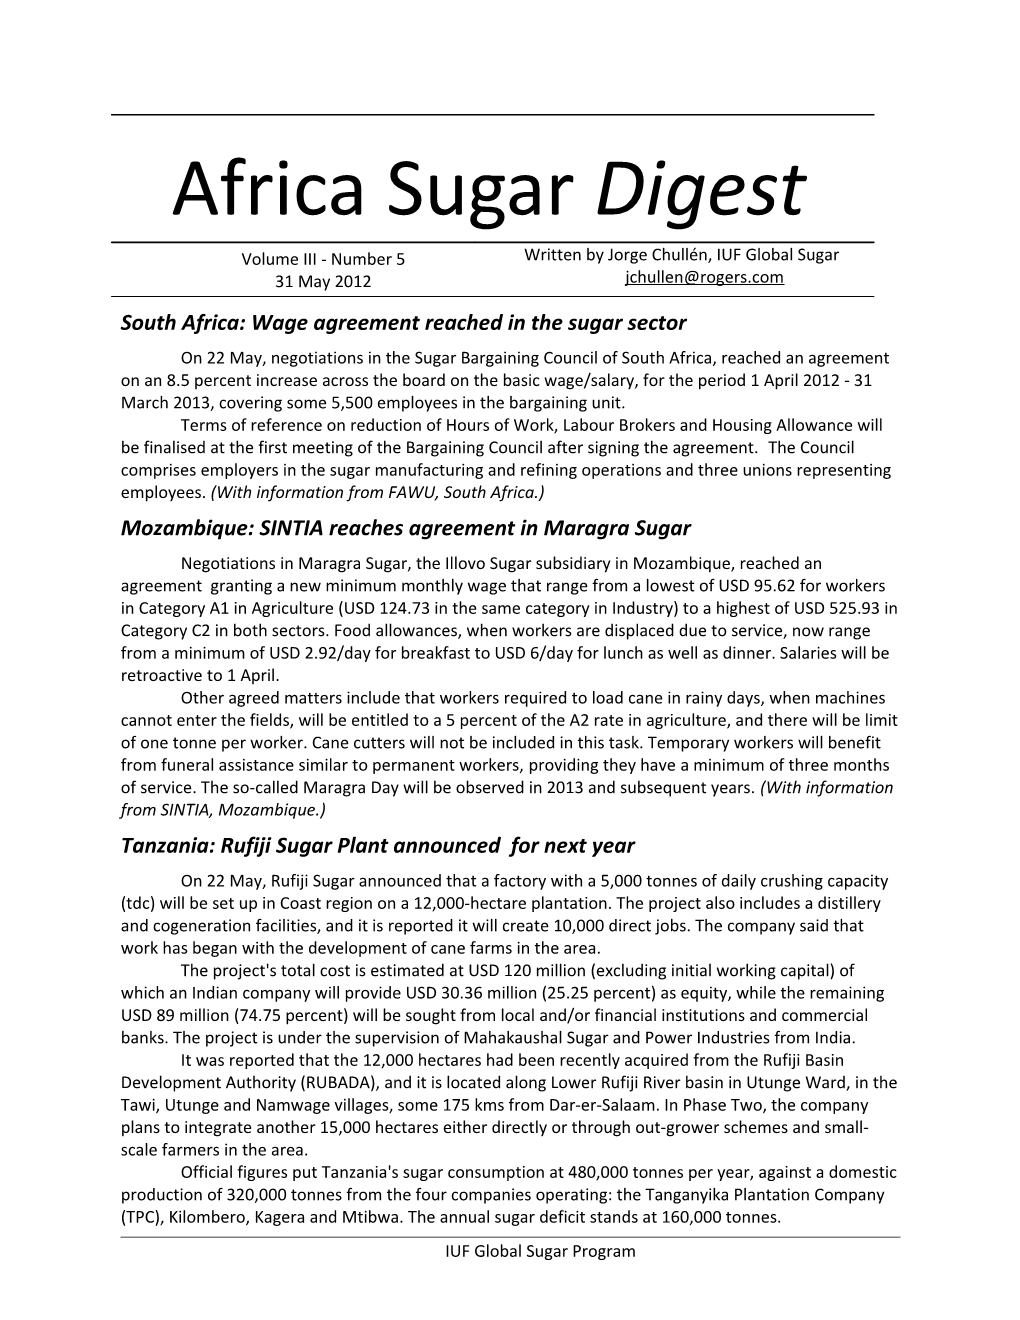 South Africa: Wage Agreement Reached in the Sugar Sector